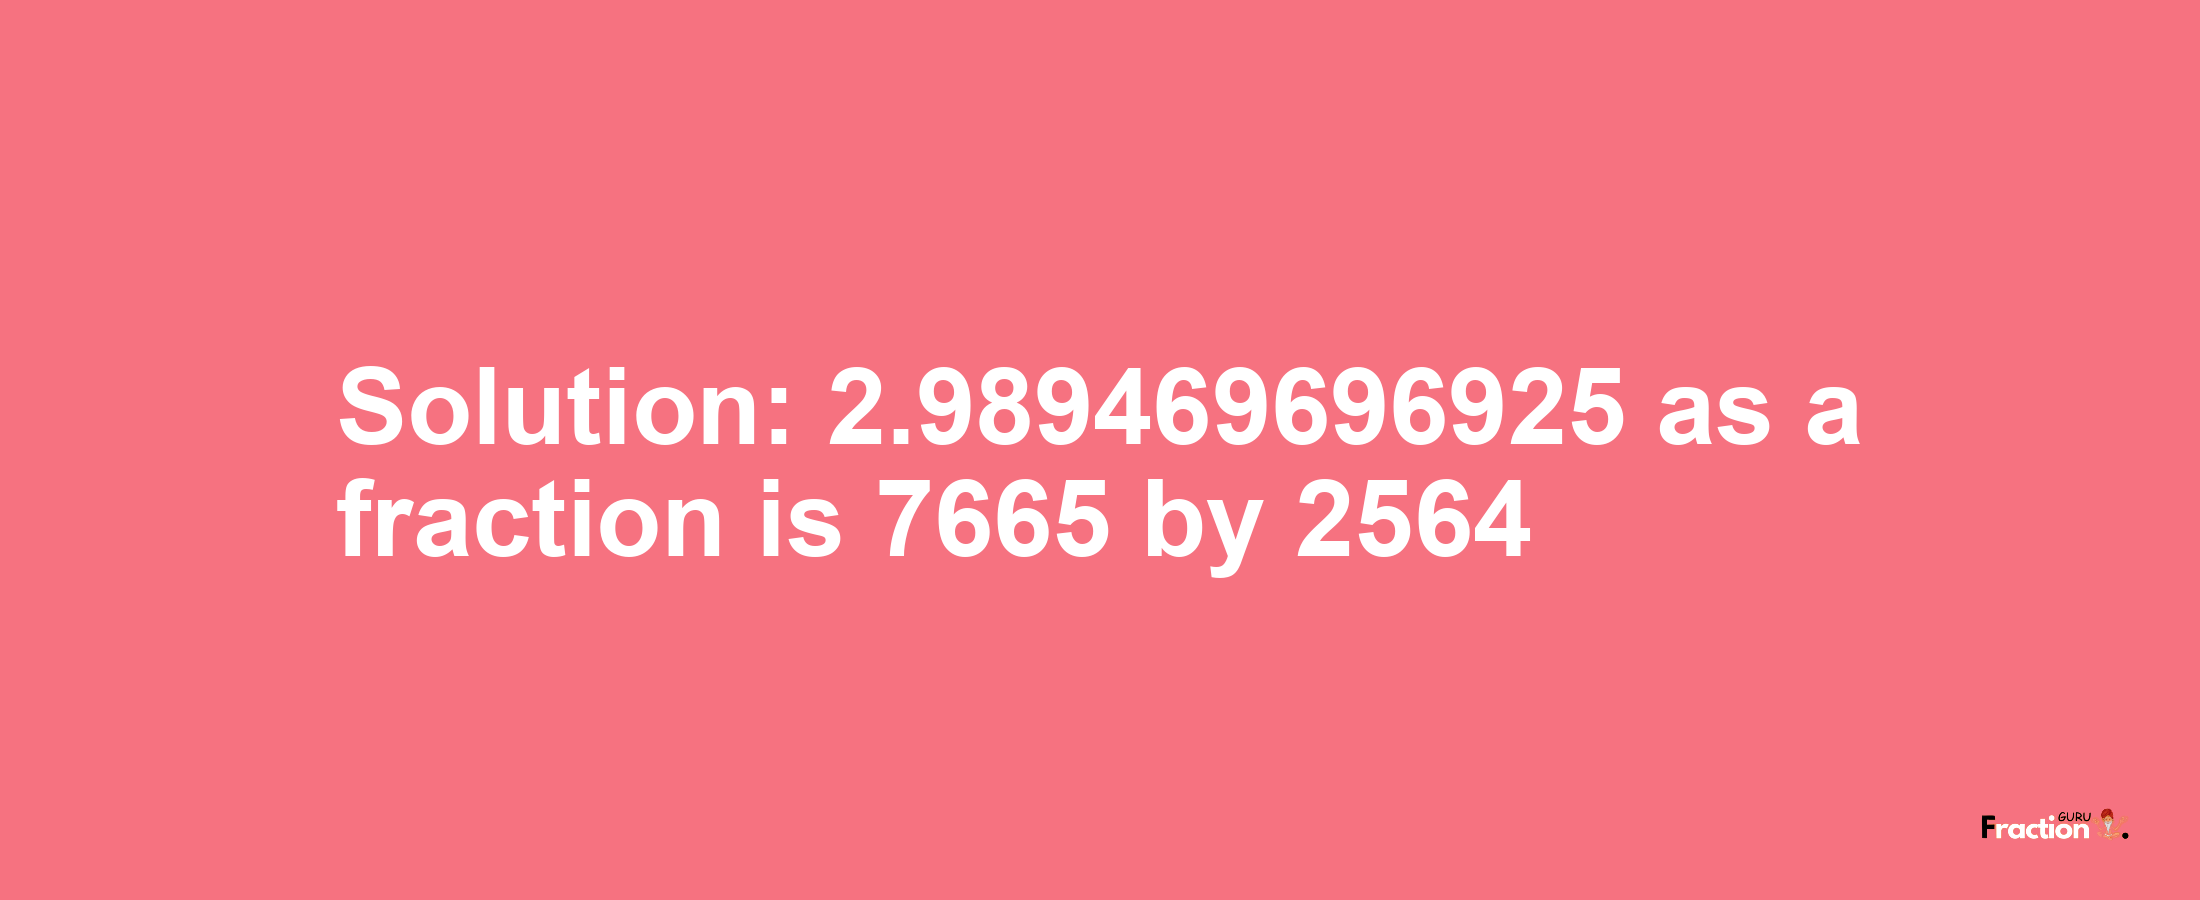 Solution:2.989469696925 as a fraction is 7665/2564